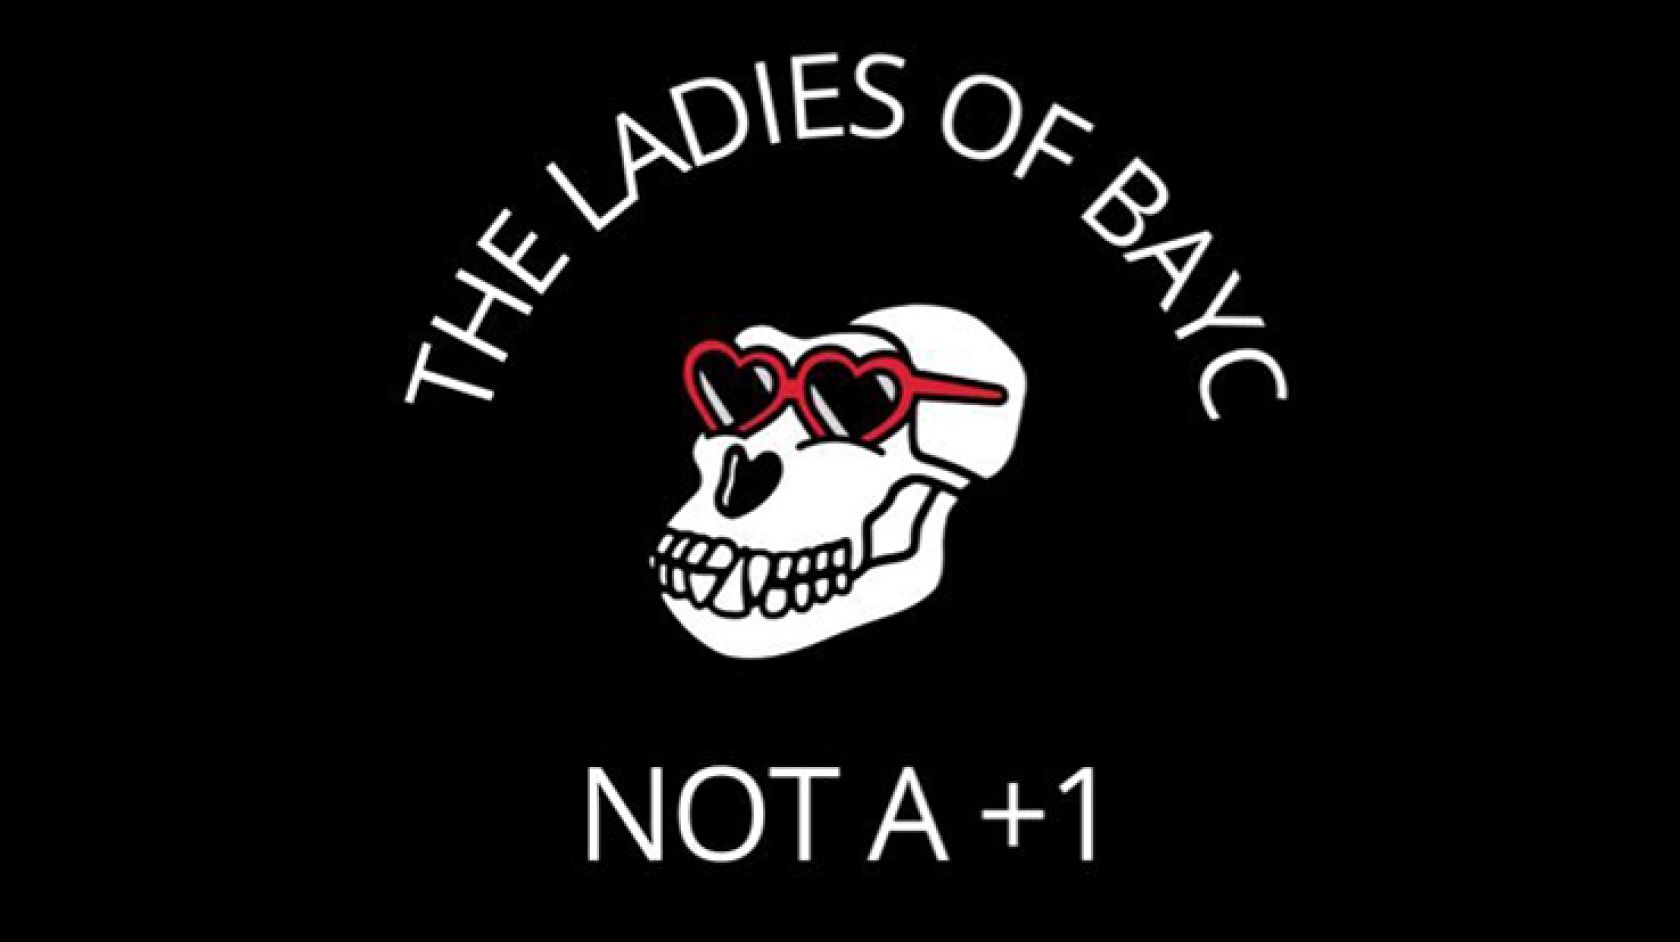 Cover Image for The Ladies of BAYC